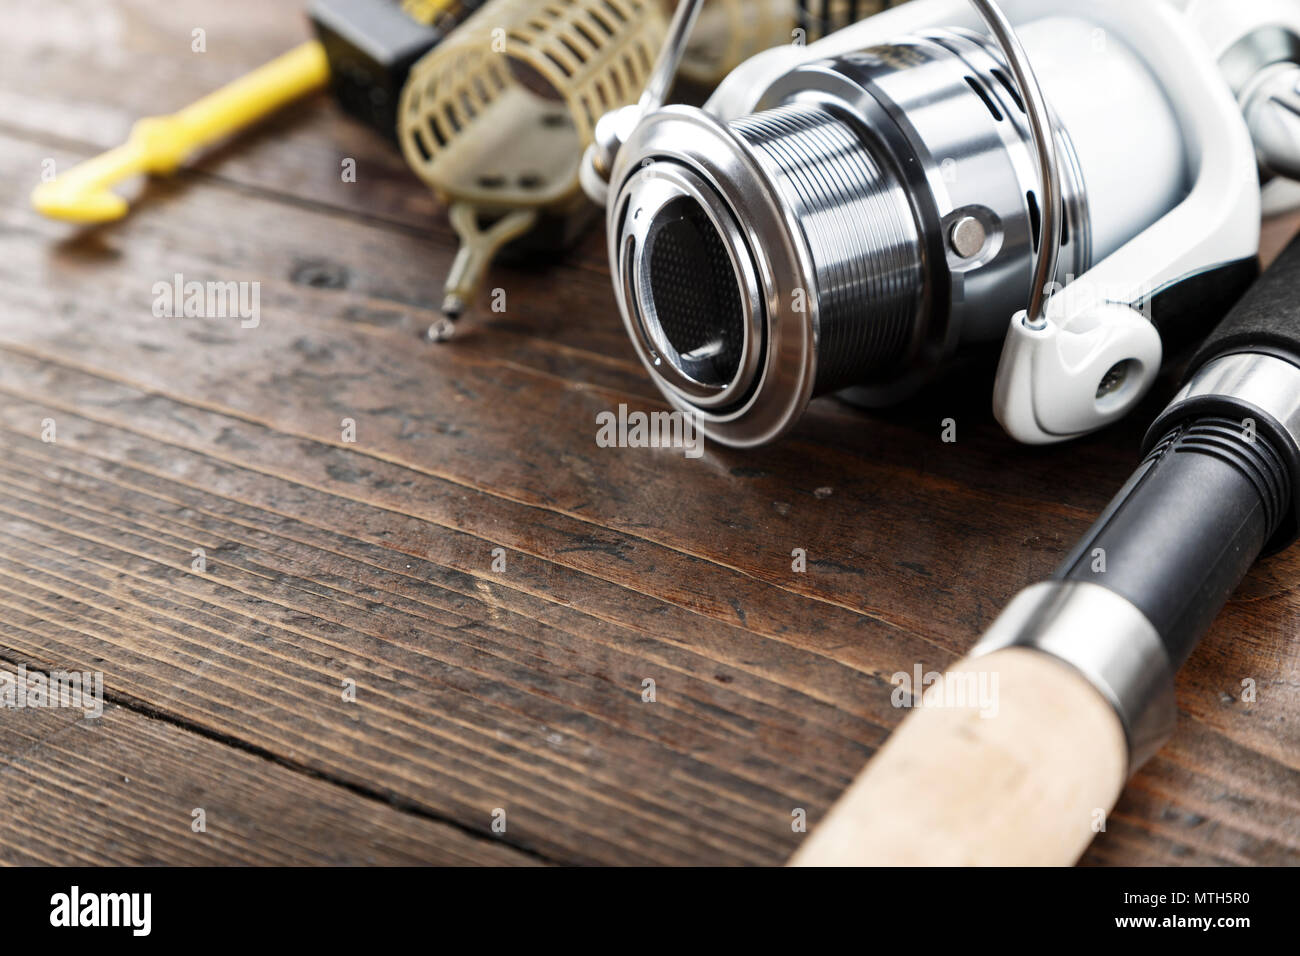 https://c8.alamy.com/comp/MTH5R0/fishing-tackle-fishing-spinning-spools-and-lures-on-dark-wooden-background-space-for-text-MTH5R0.jpg